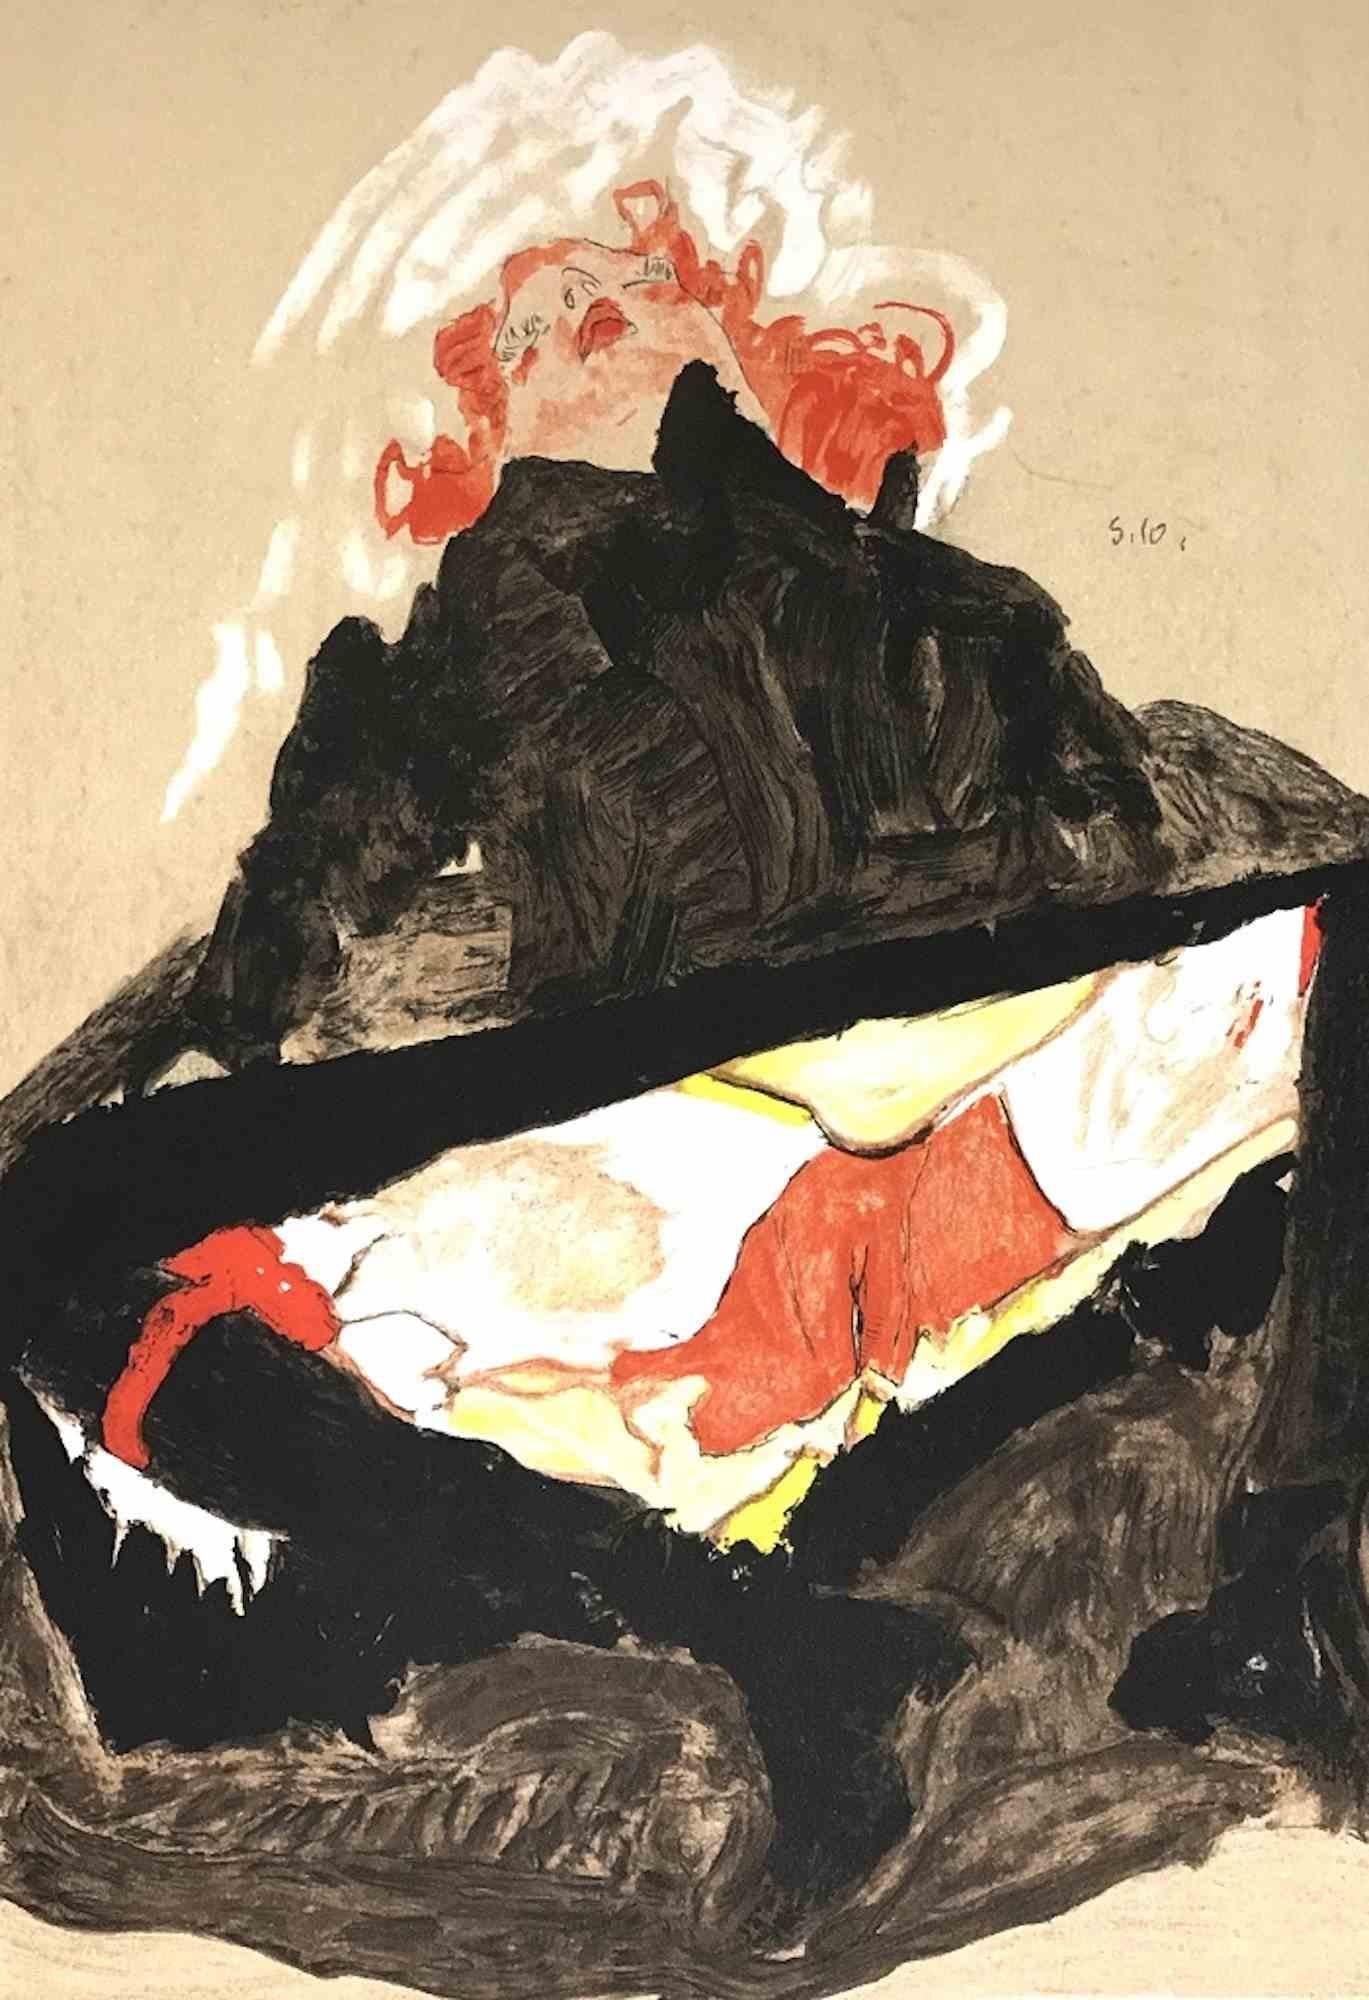 Egon Schiele Portrait Print - Red-Haired Girl With Spread Legs - Lithograph - 2007